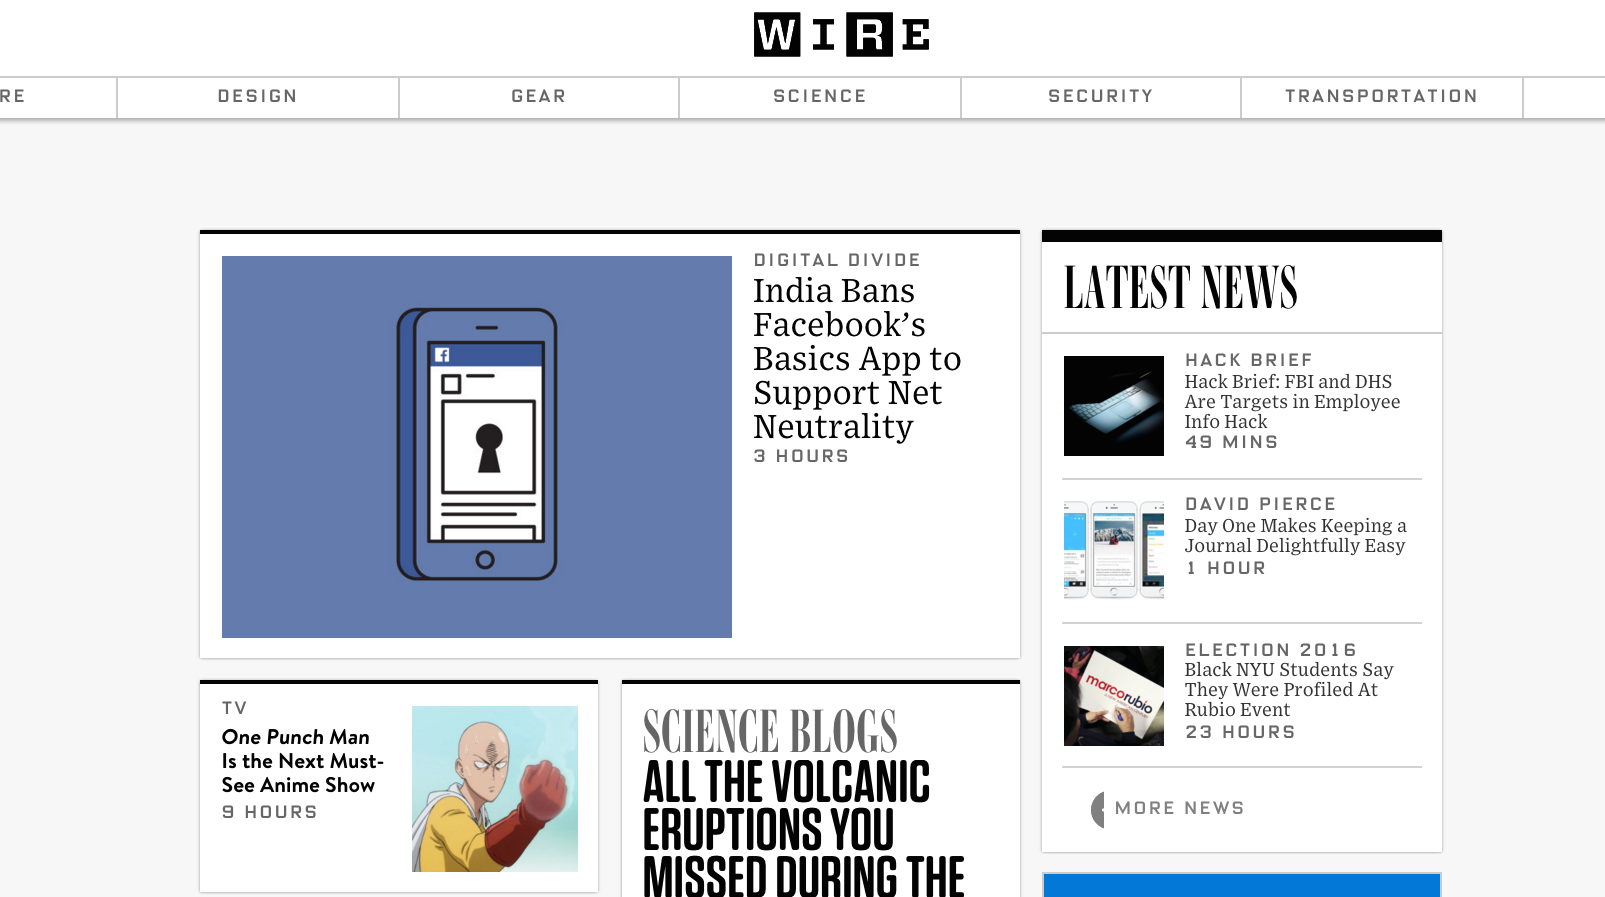 Want Wired.com Without Ads? That’ll Be $3.99/Month